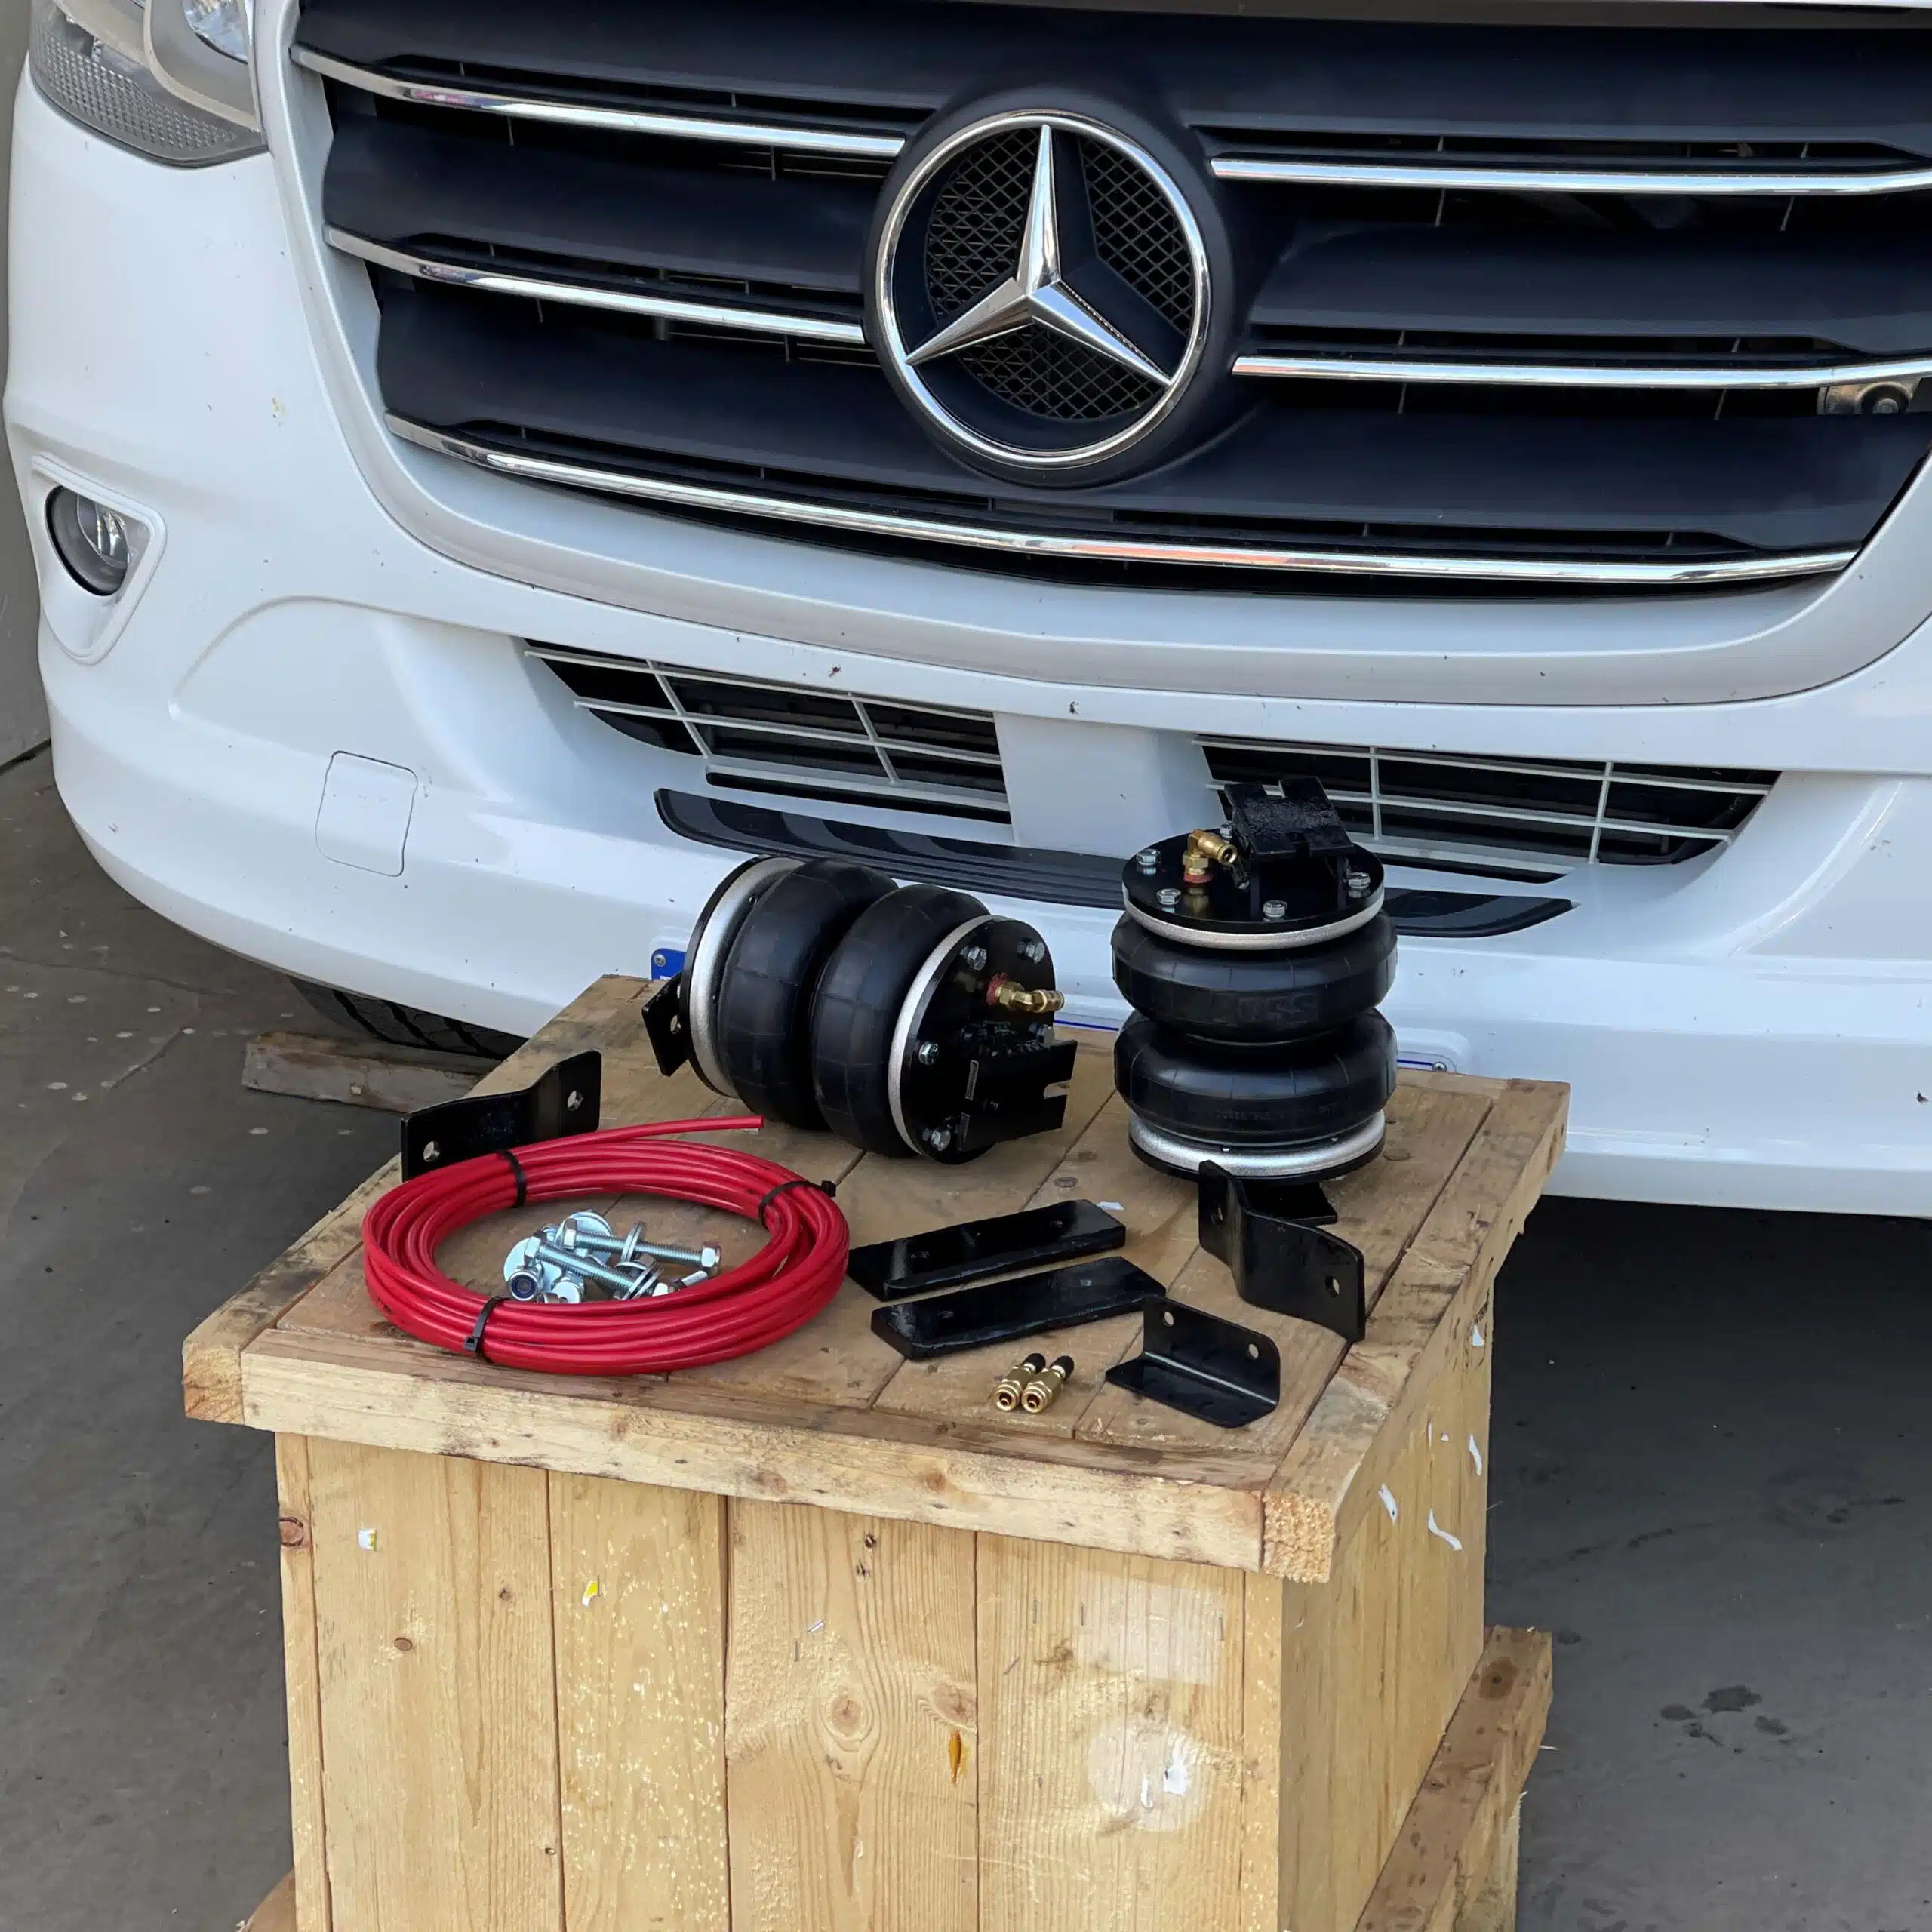 Sprinter/Crafter load support kit laid out on a wooden table in front of a Mercedes Sprinter van